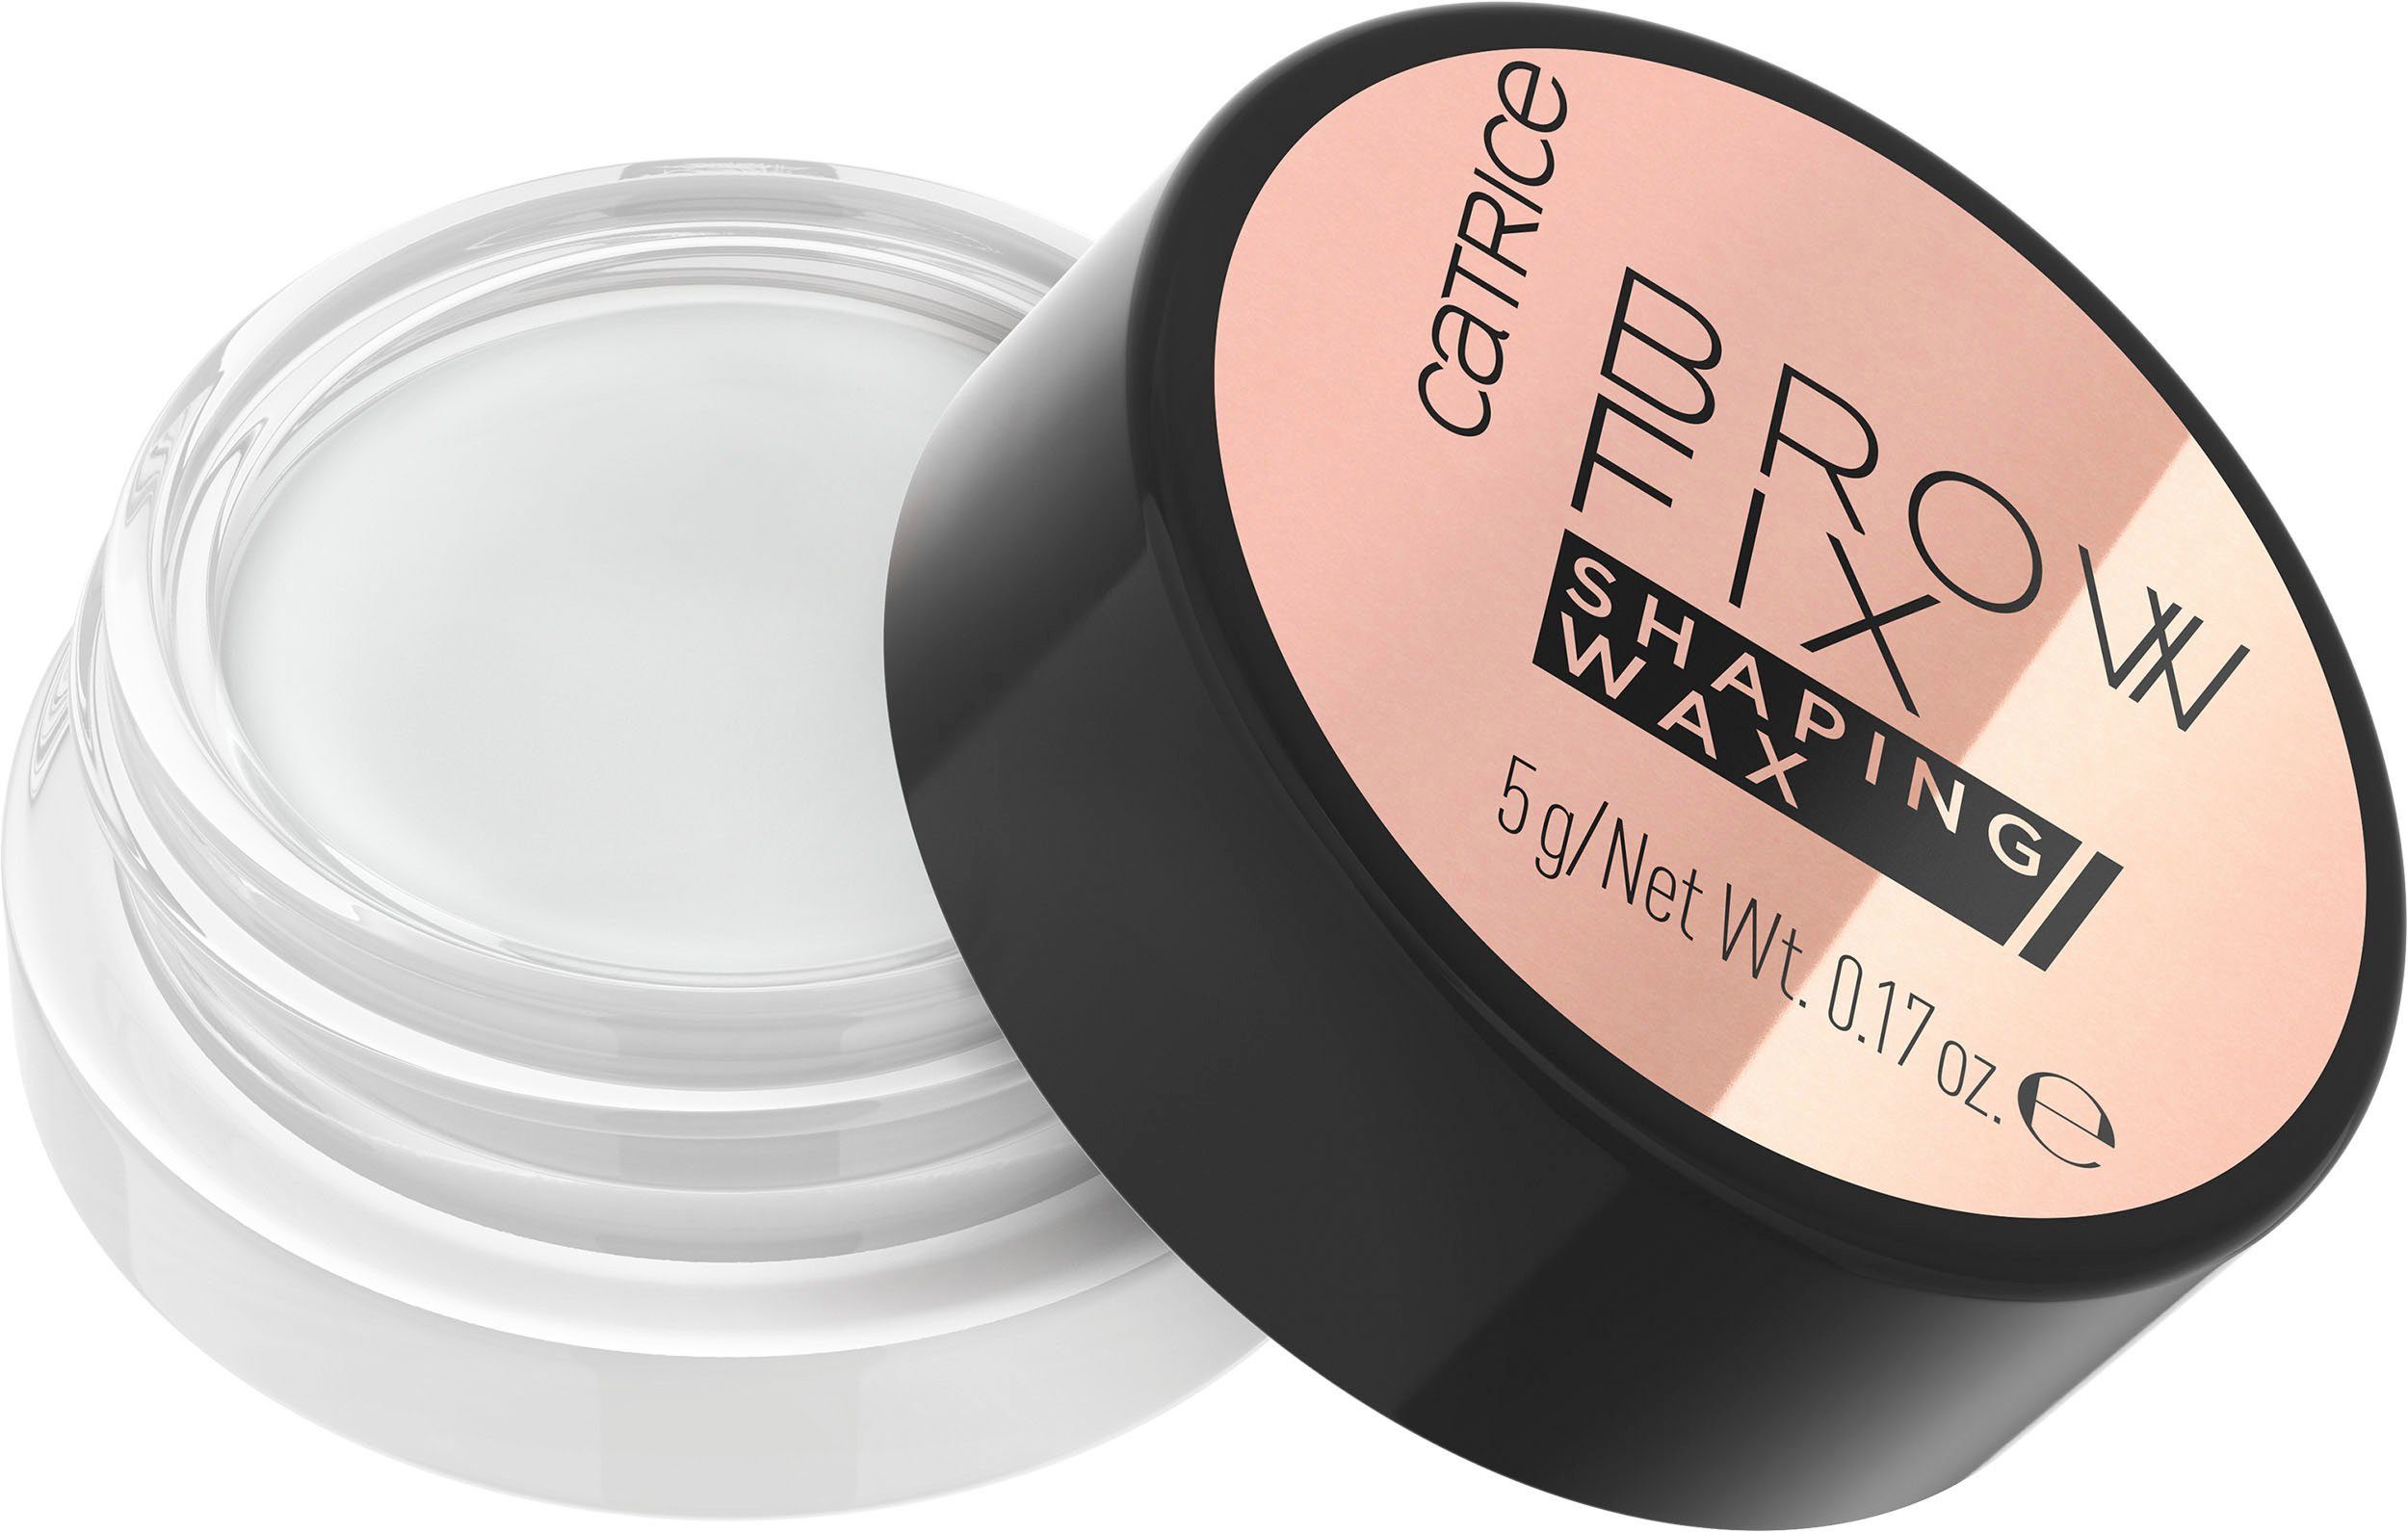 Catrice Augenbrauen-Gel Fix Wax 010, Catrice Shaping 3-tlg. Brow